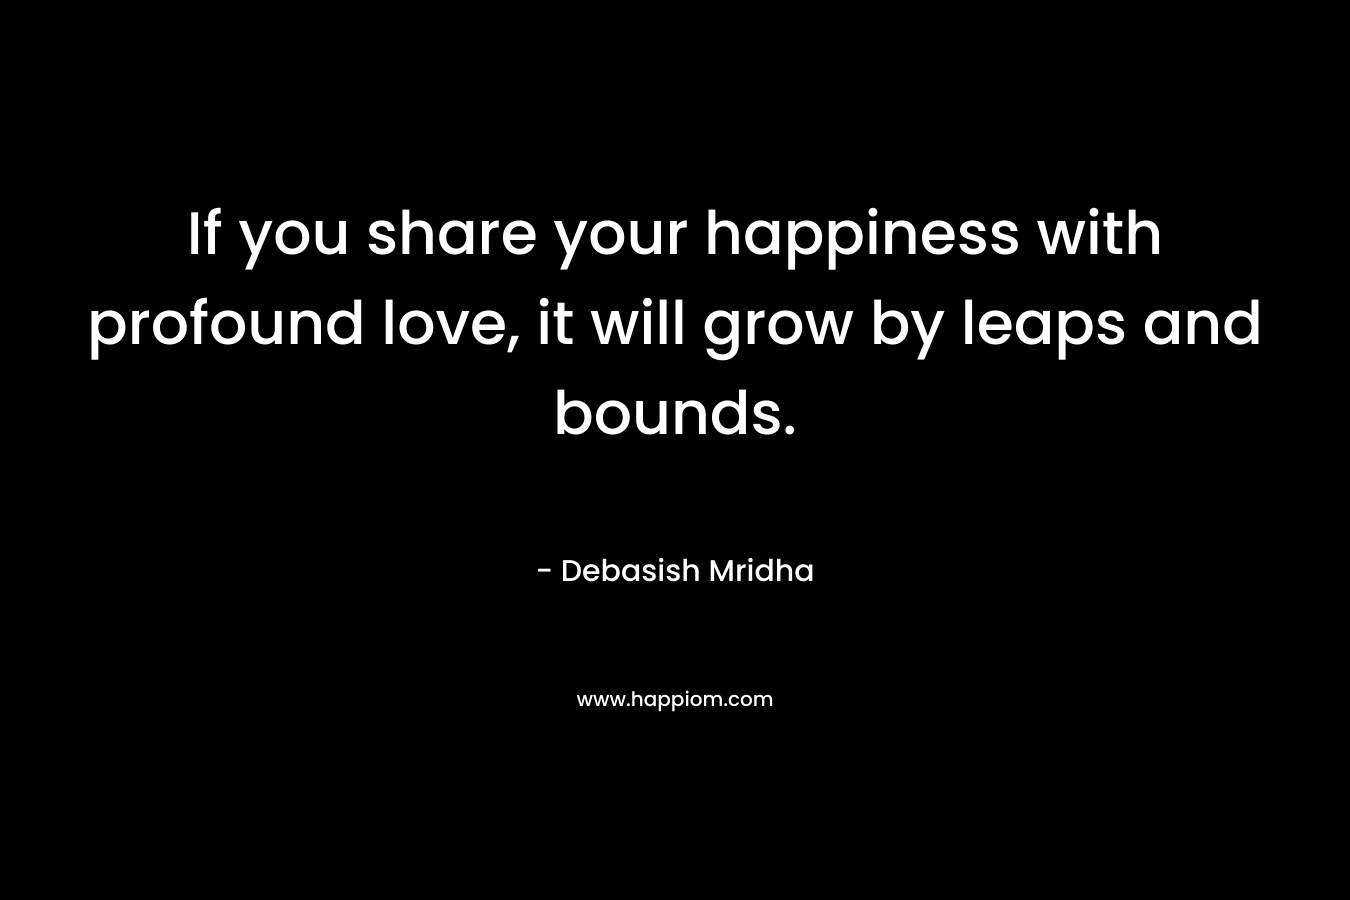 If you share your happiness with profound love, it will grow by leaps and bounds. – Debasish Mridha